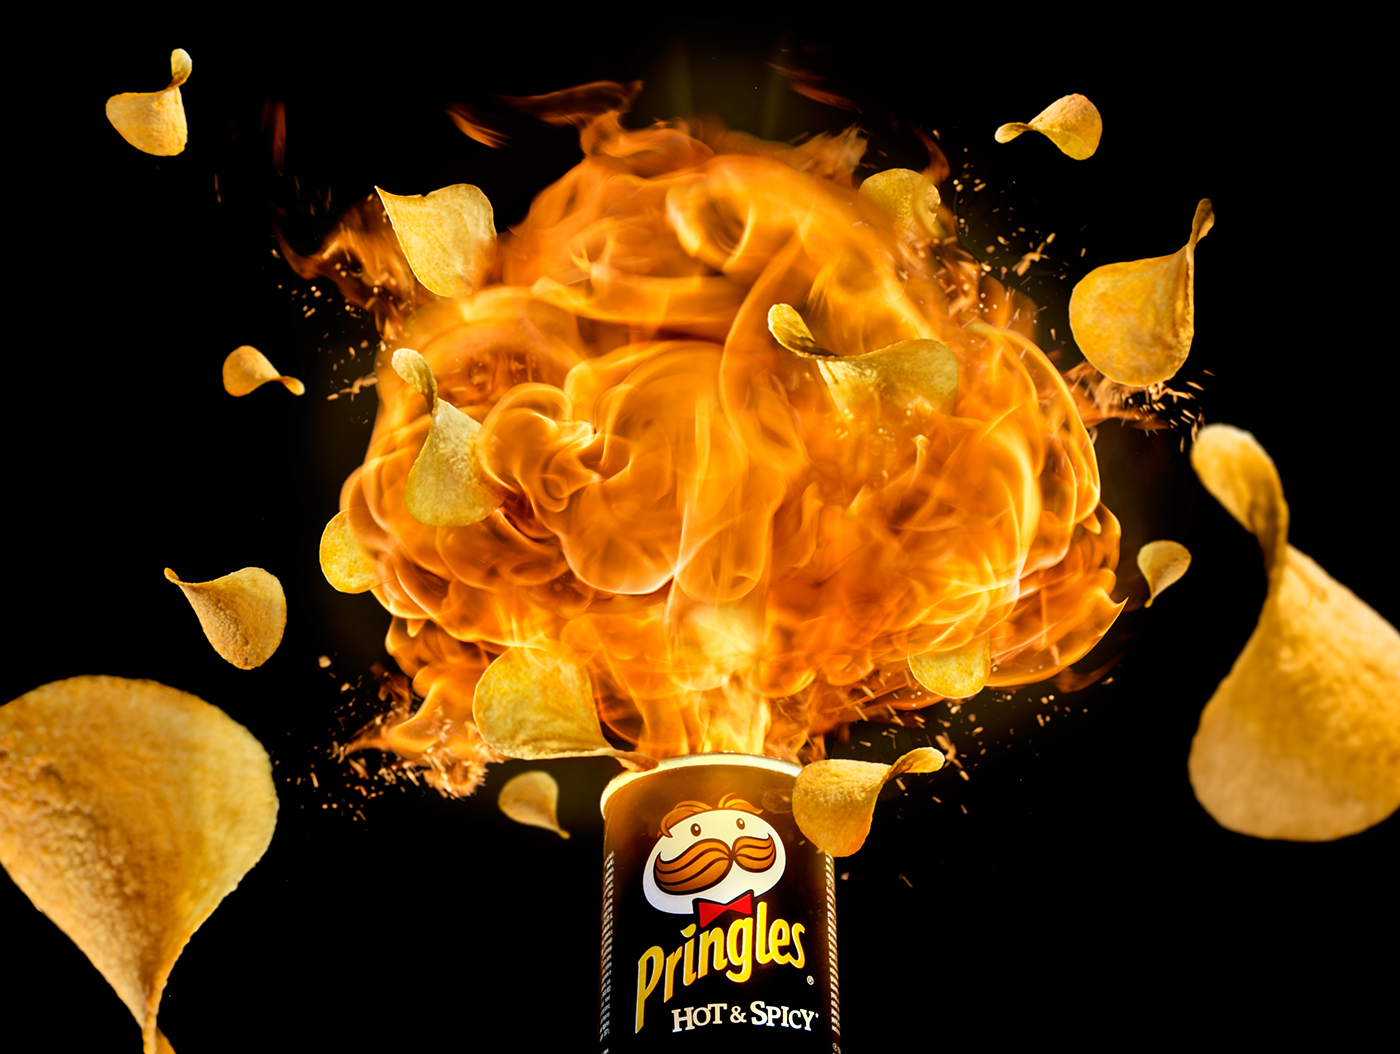 fire pringles explosion BANG fuoco Blame flame red black potato Hot spicy Food  still life